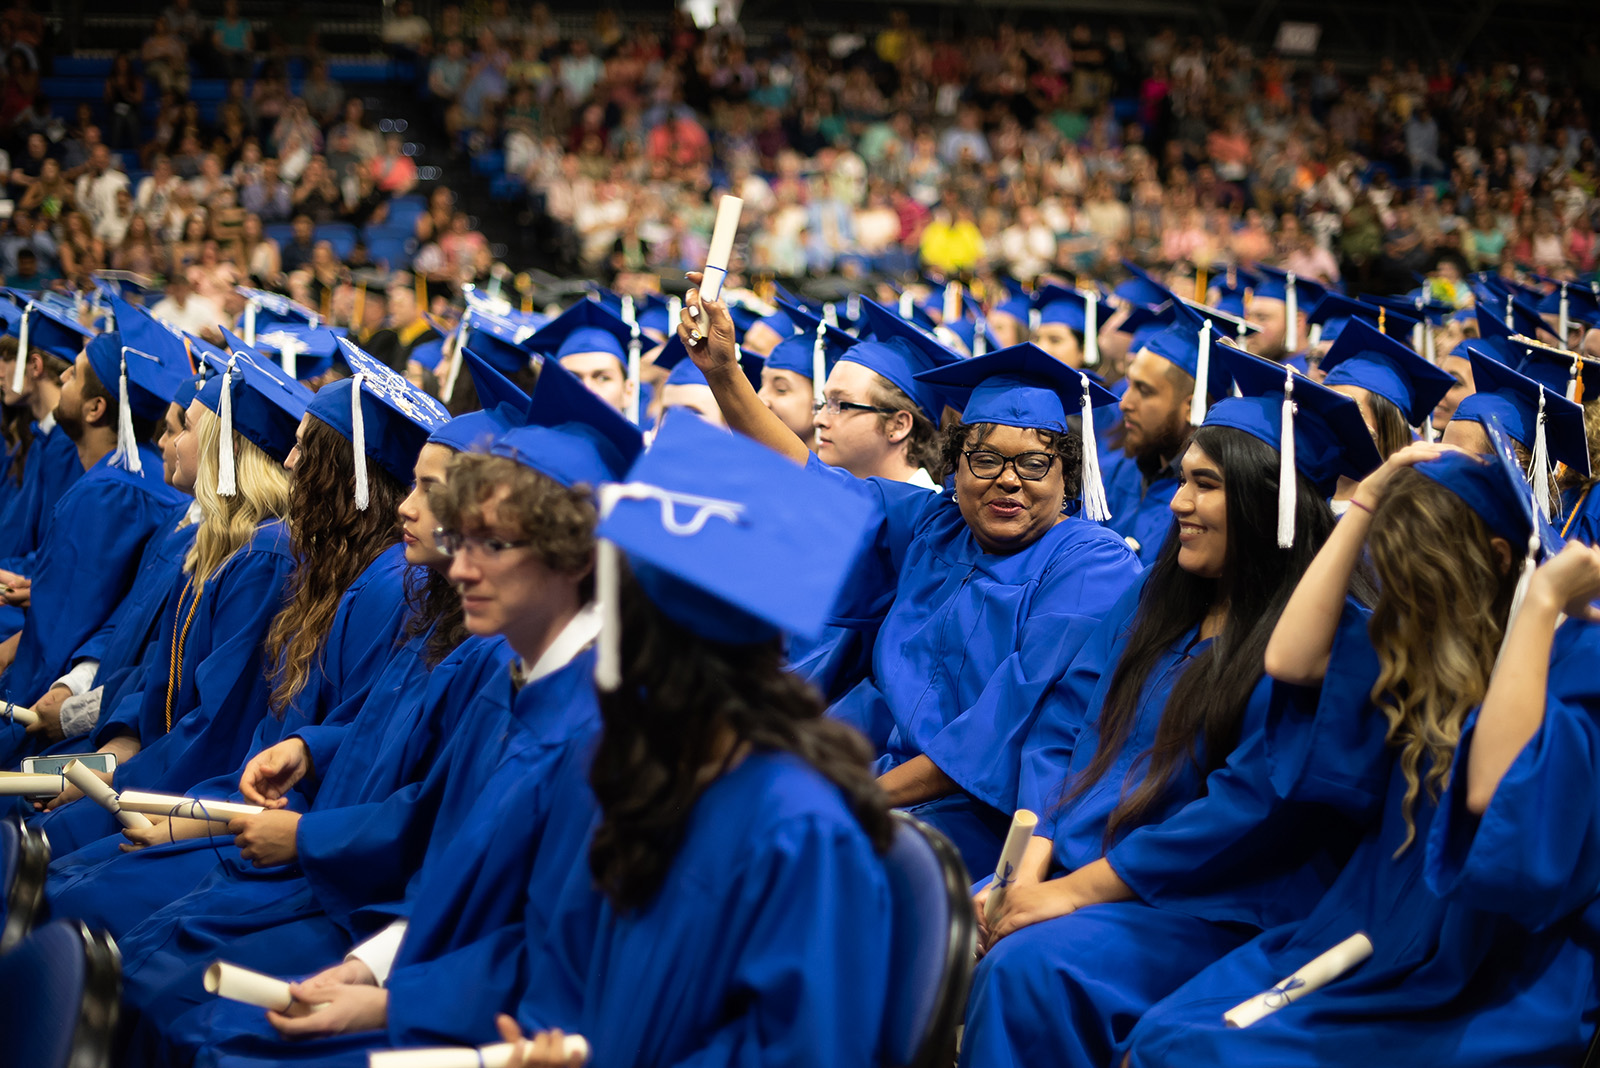 Close to 300 Randolph Community College graduates crossed the stage to receive their degrees, diplomas, or certificates Wednesday, May 8, at the Fieldhouse at the Greensboro Coliseum Complex.